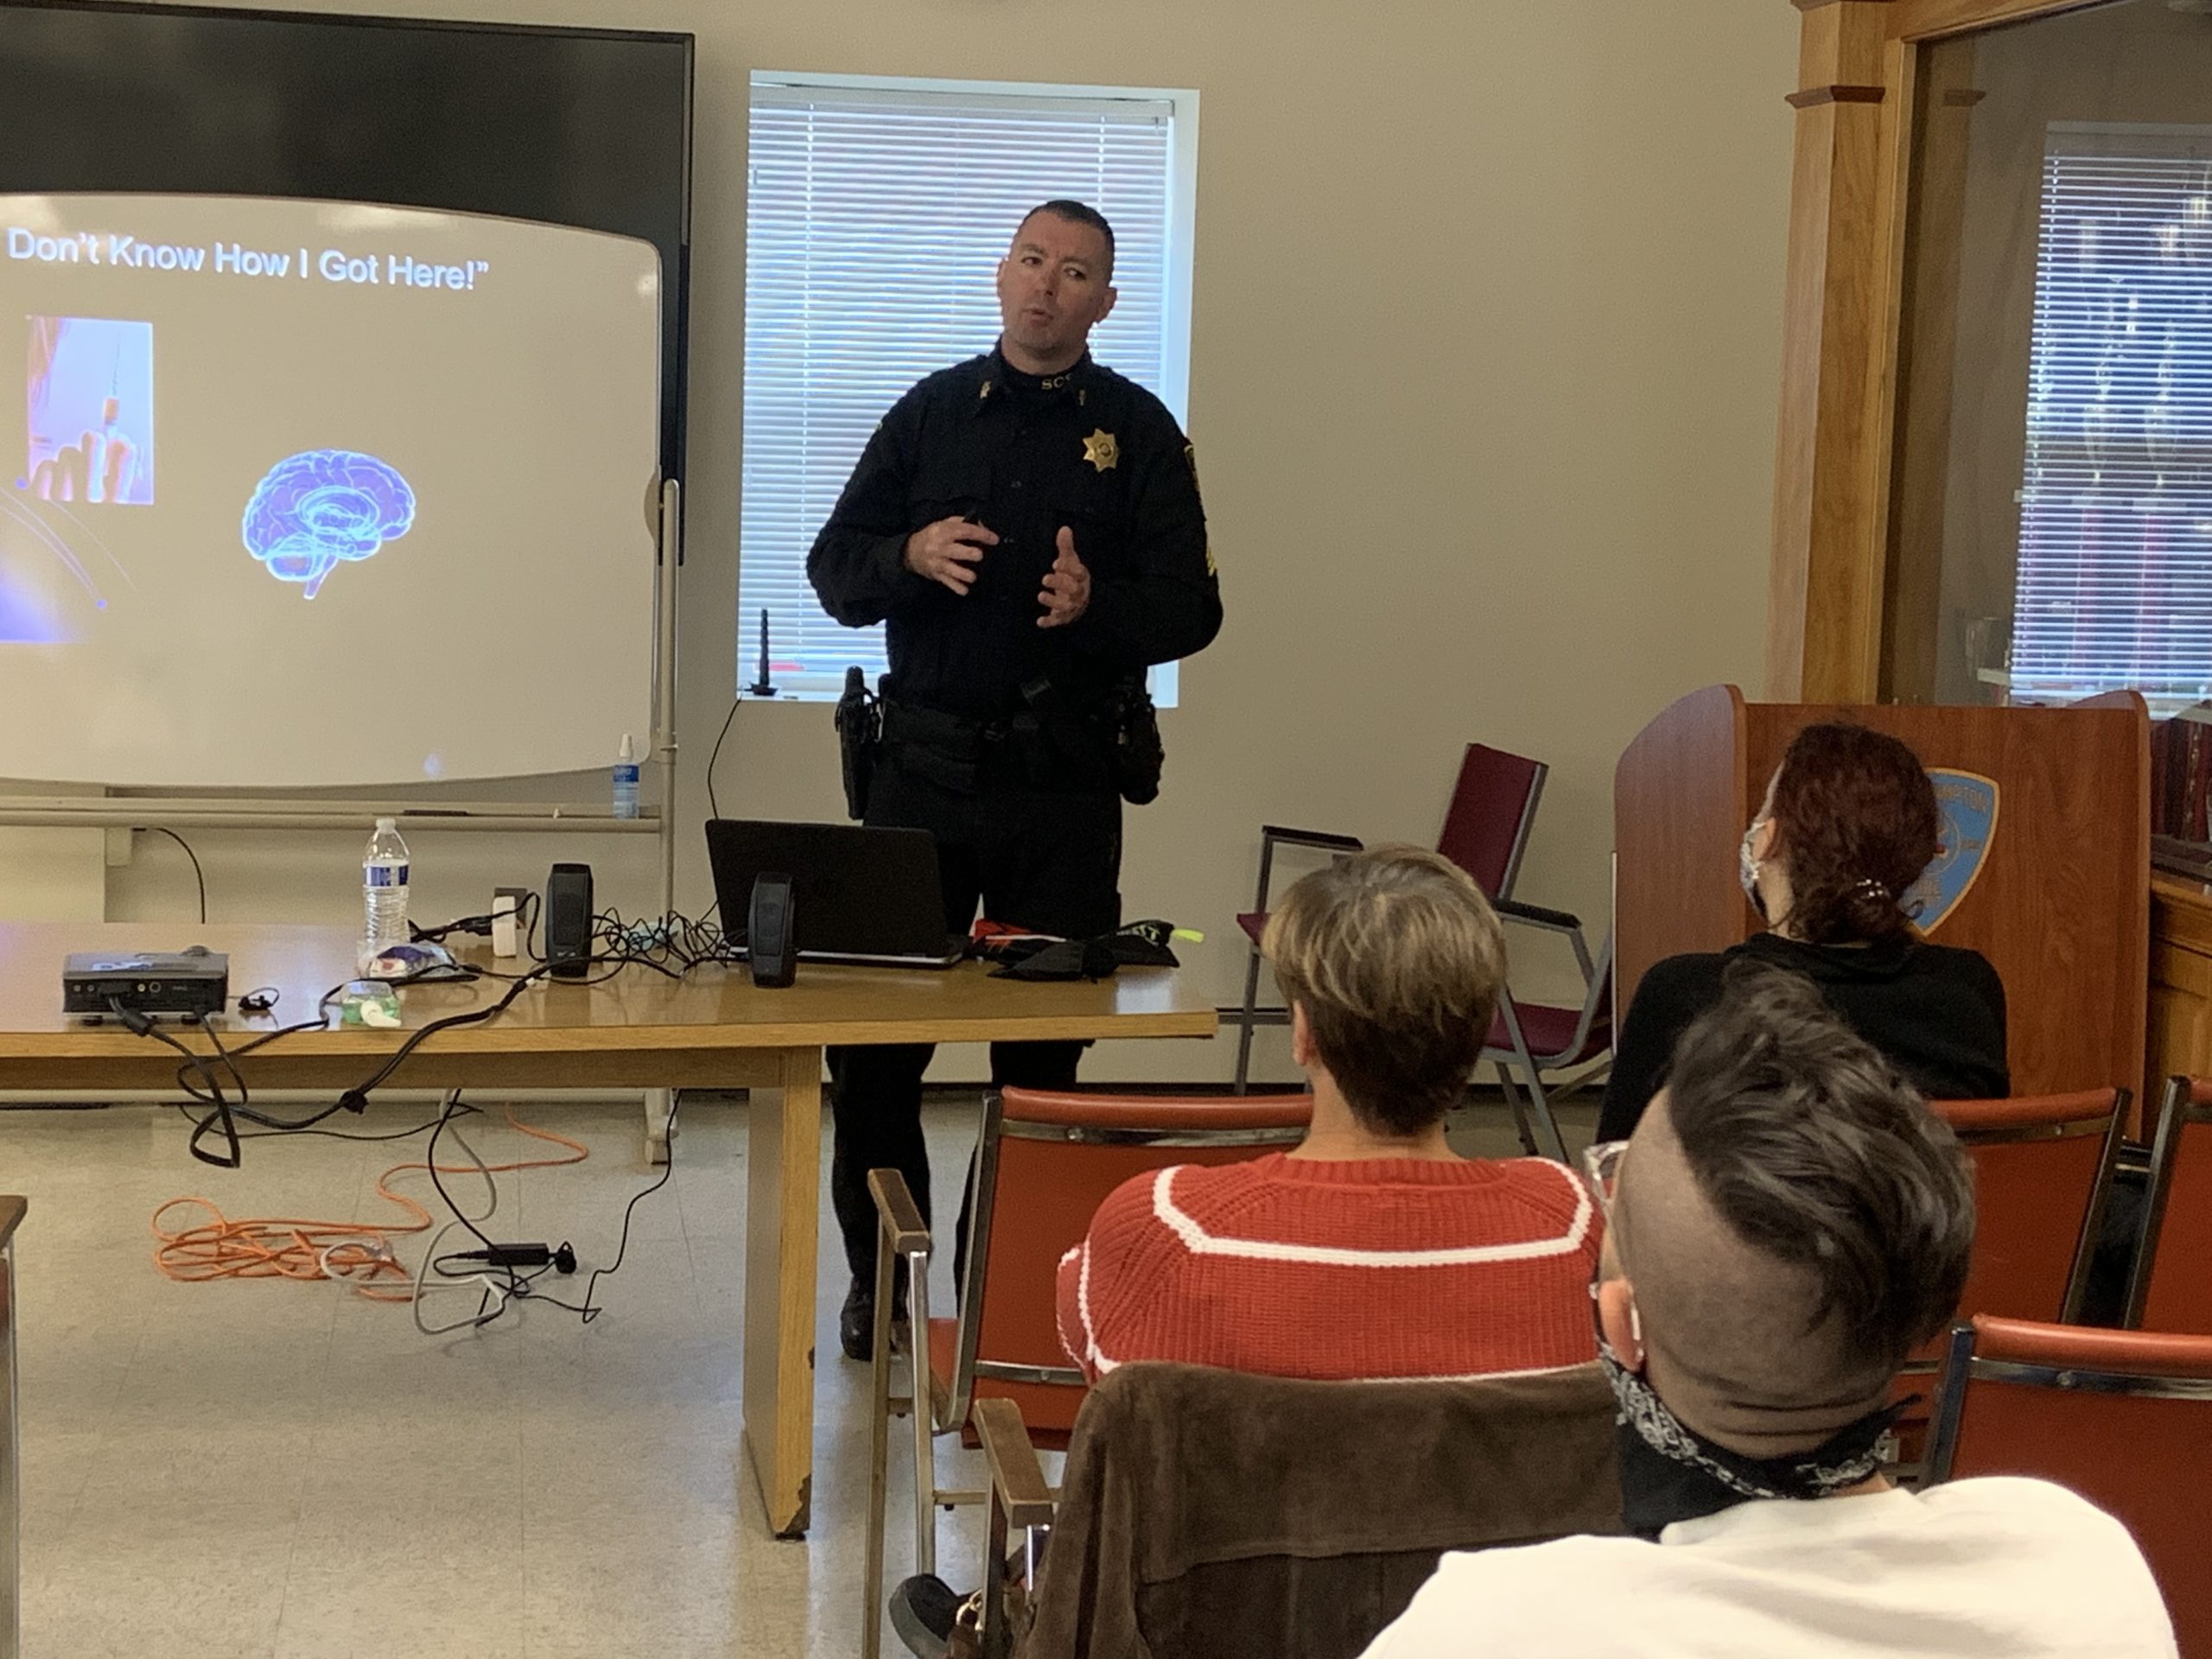 Sgt. William Weick of the Suffolk County Sheriff's Office leads a Narcan training session at the Bridgehampton Firehouse. STEPHEN J. KOTZ